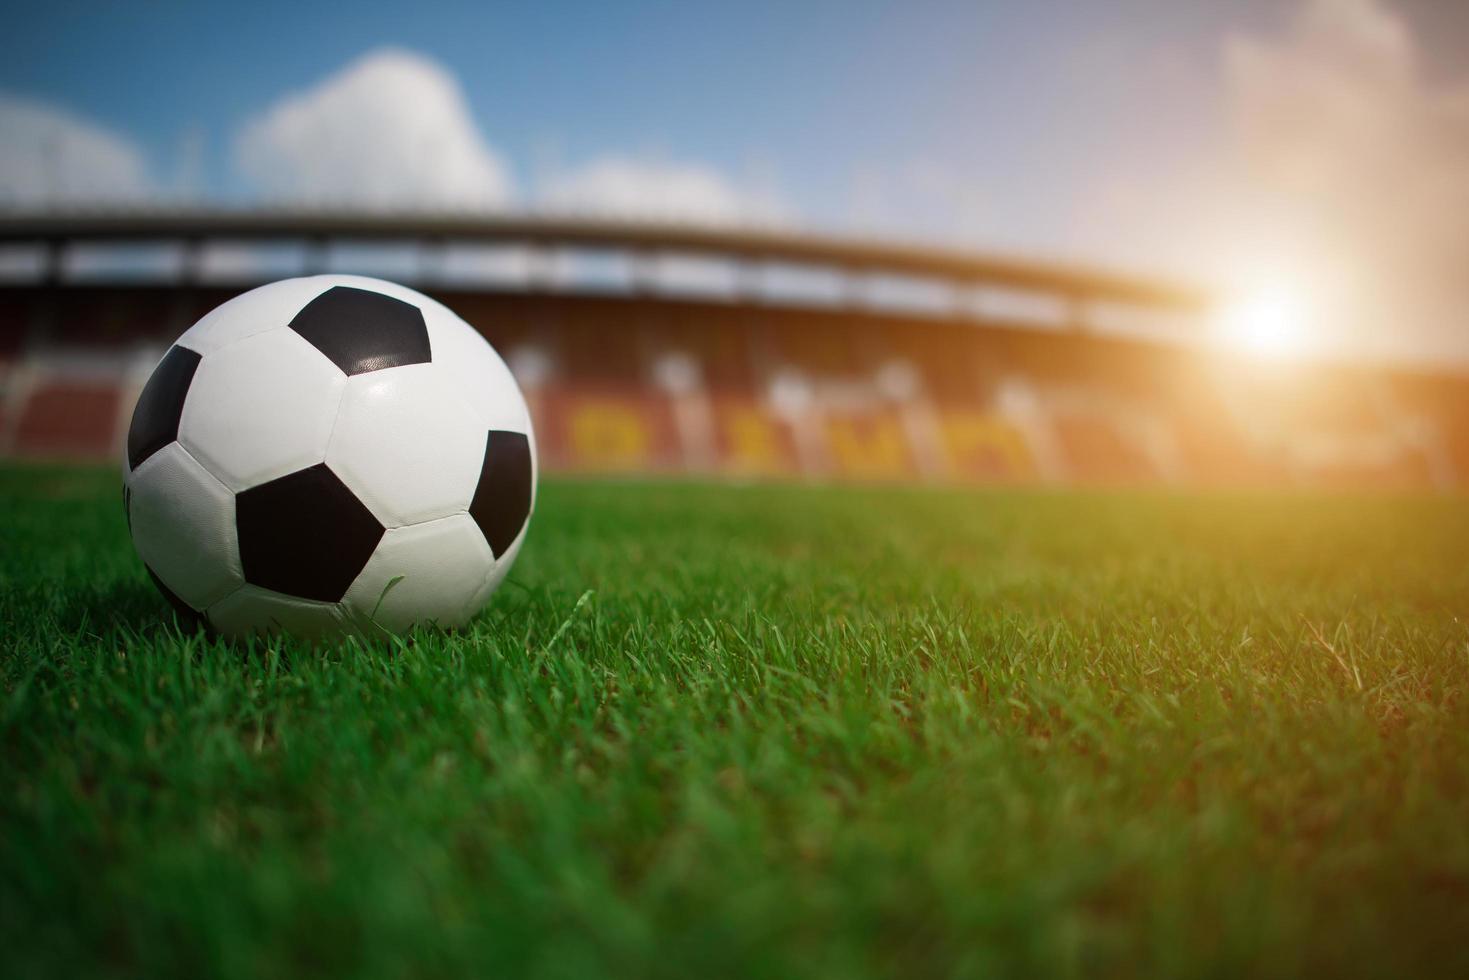 Soccer ball on grass with stadium background photo